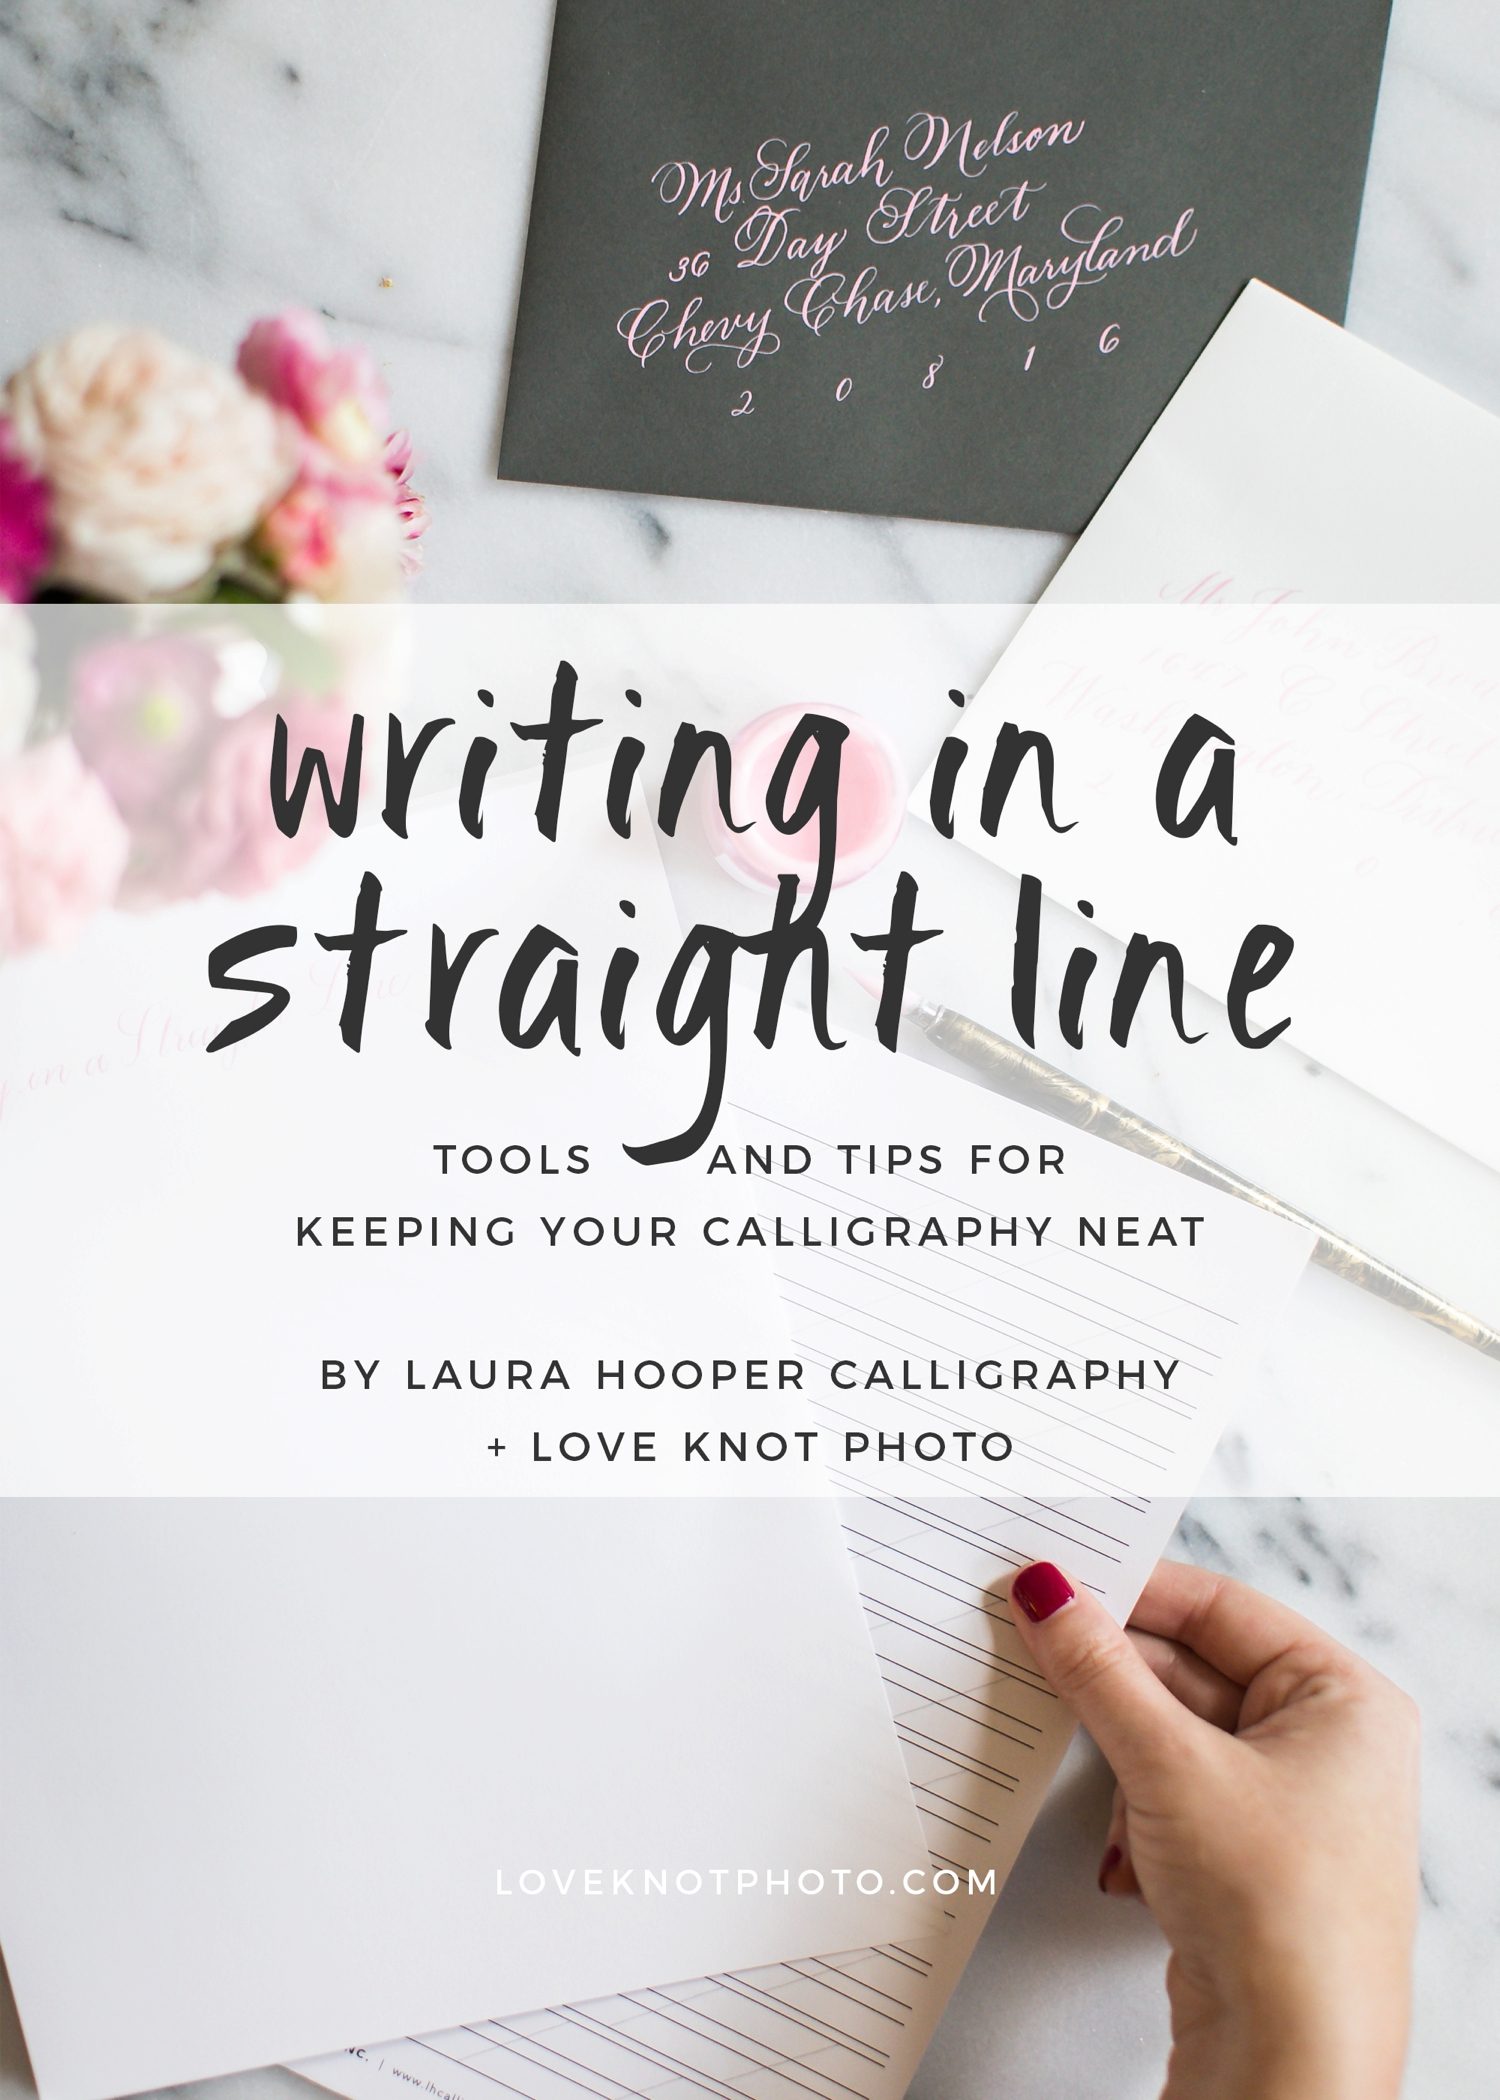 brand photography product photography blog post laura hooper calligraphy love knot photo